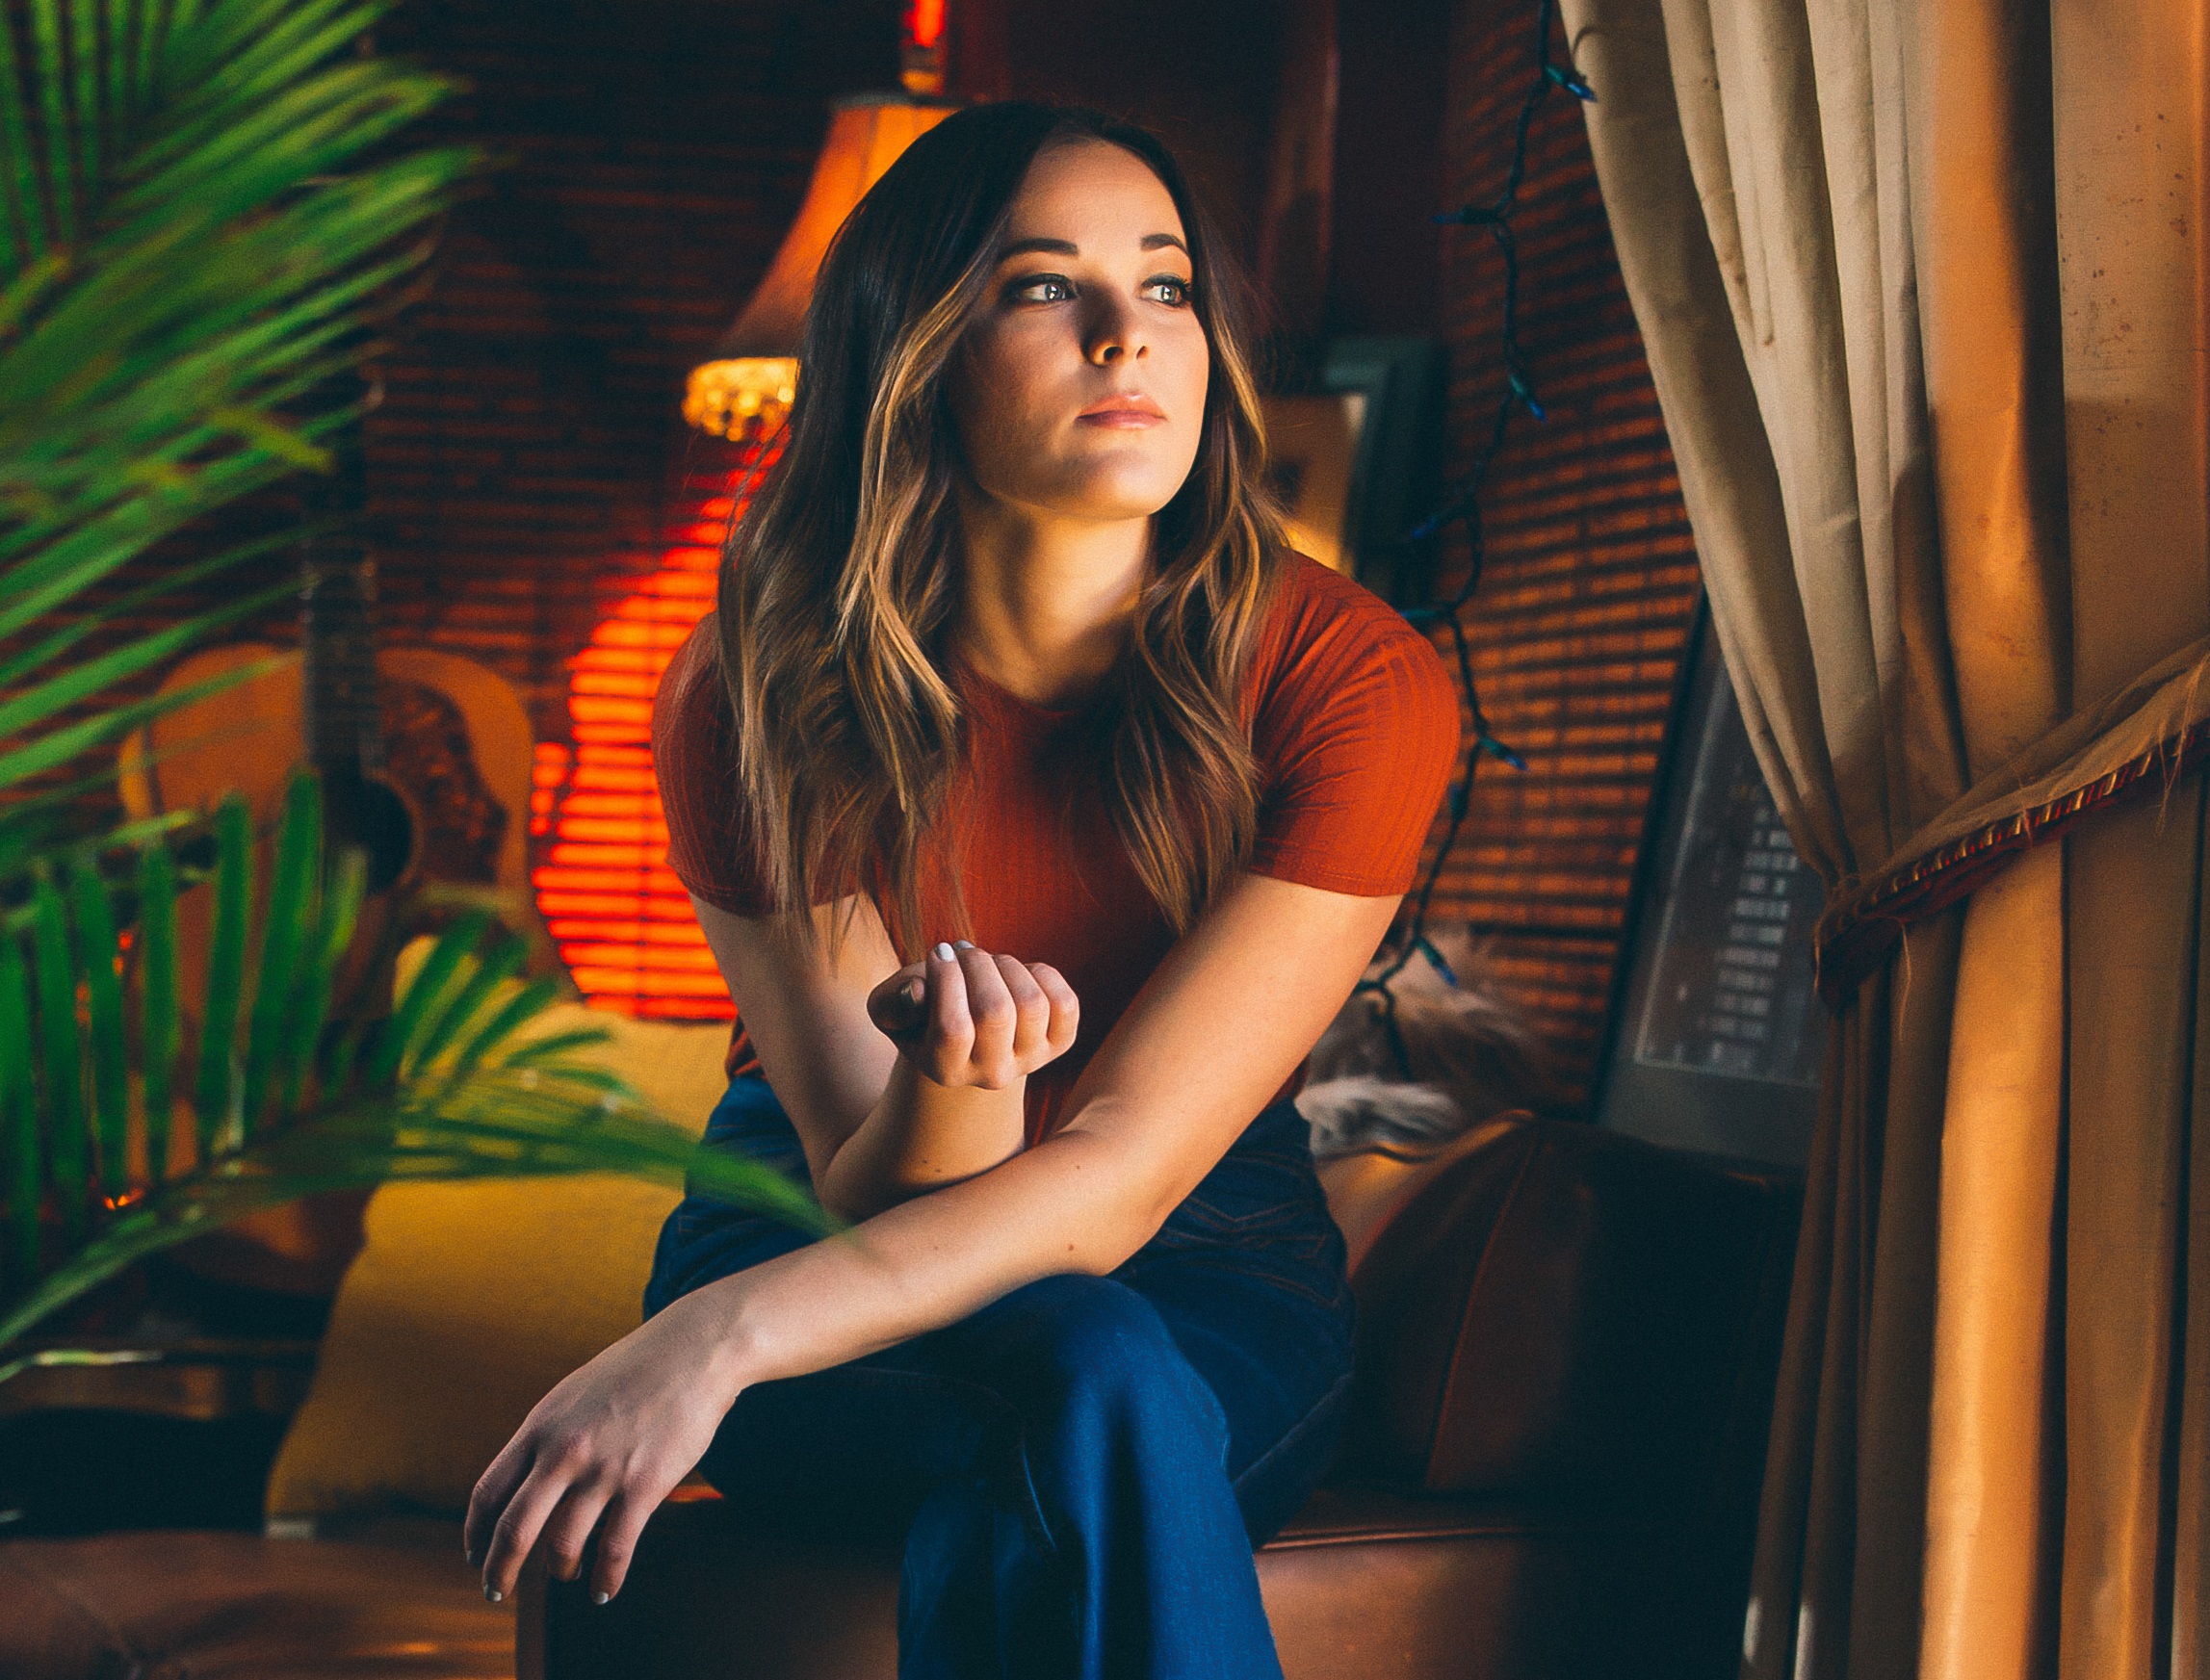 Jillian Jacqueline Creates Anthemic Closure in ‘God Bless This Mess’